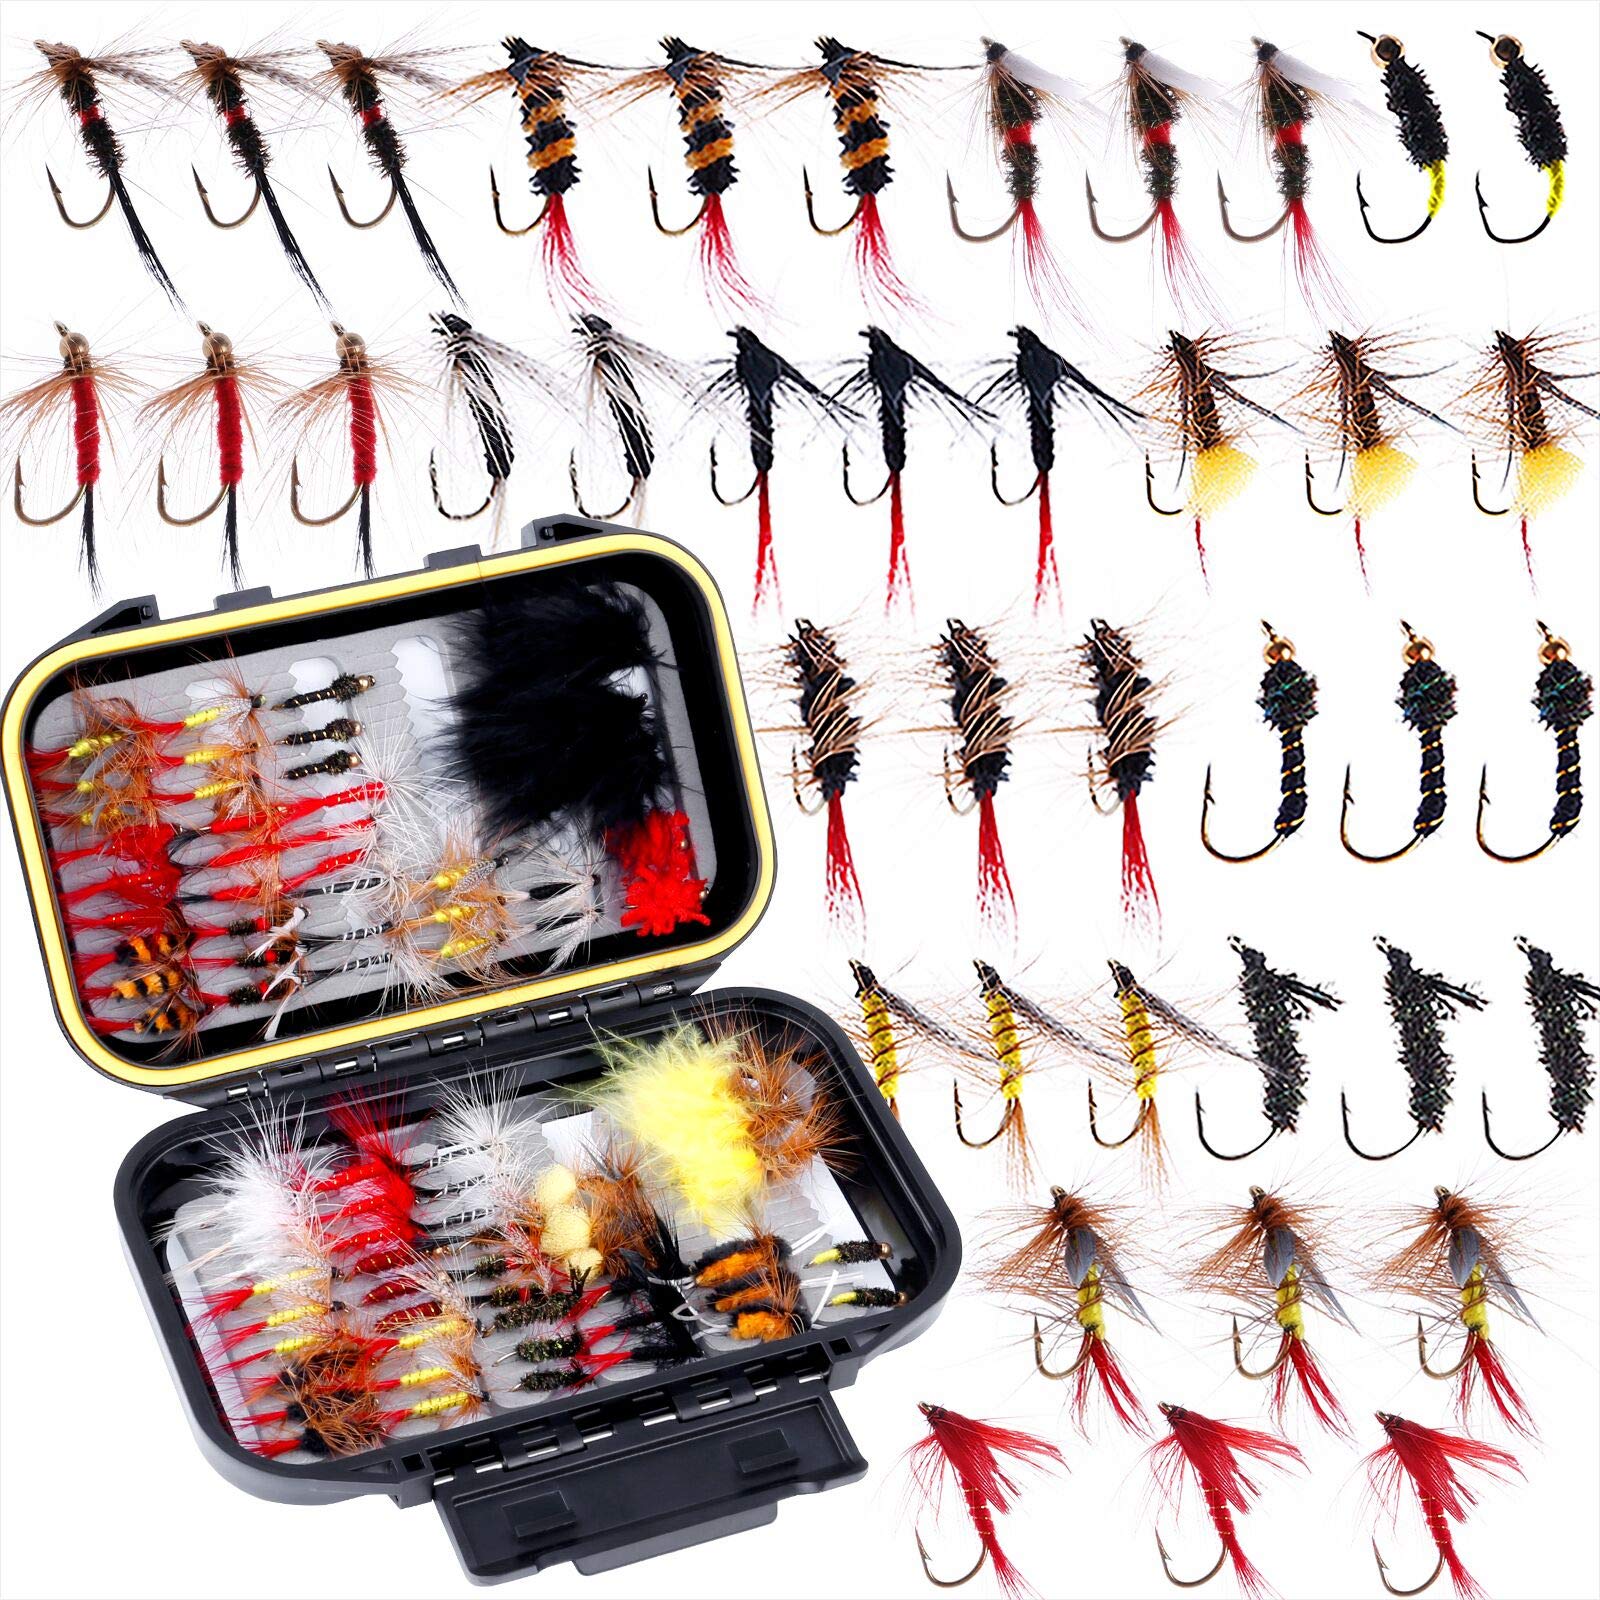 Fly Dry Trout Kit, Fishing Fly Kit, Fishing Lures